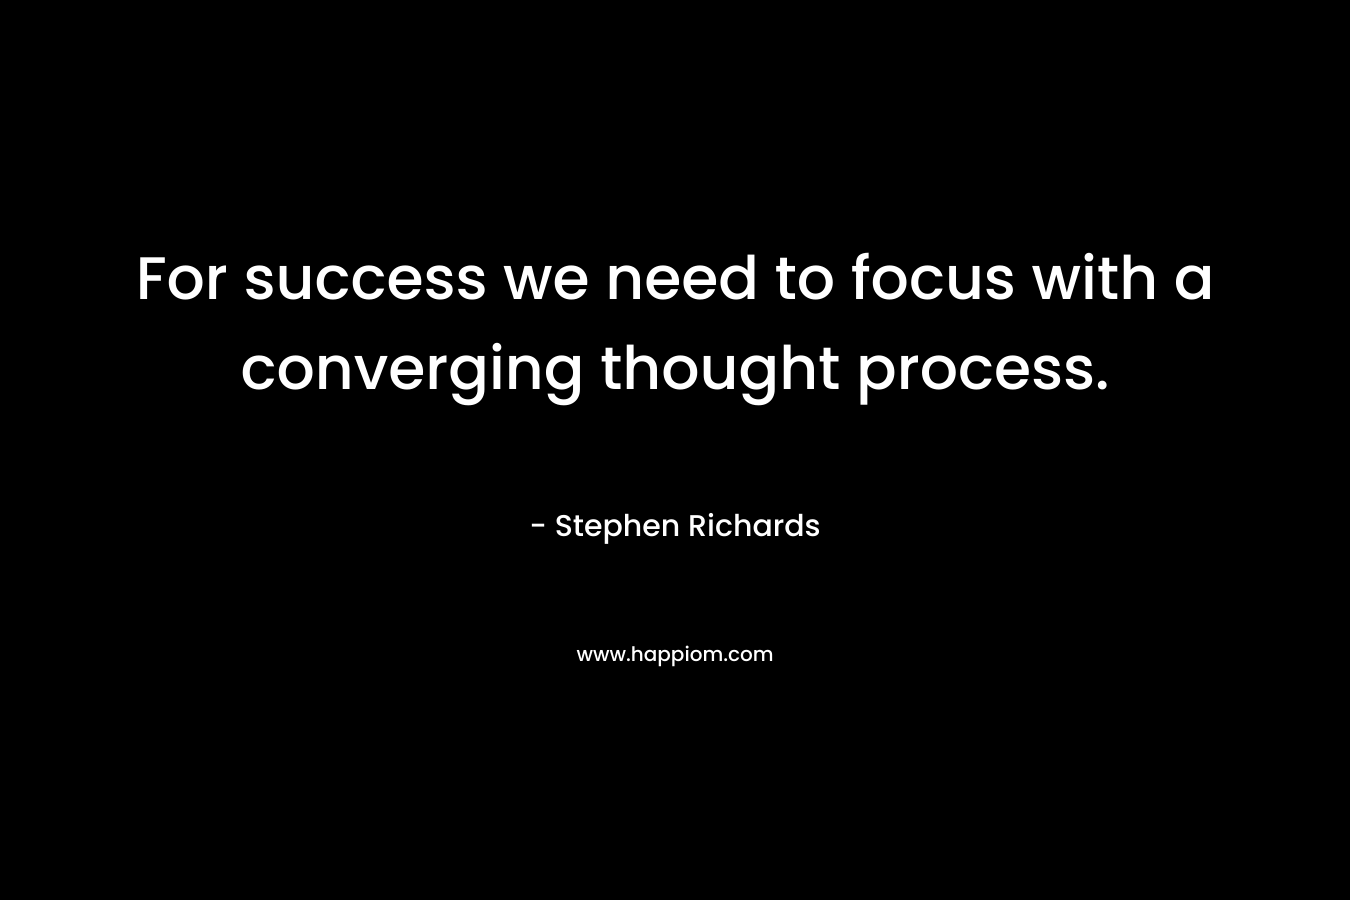 For success we need to focus with a converging thought process.